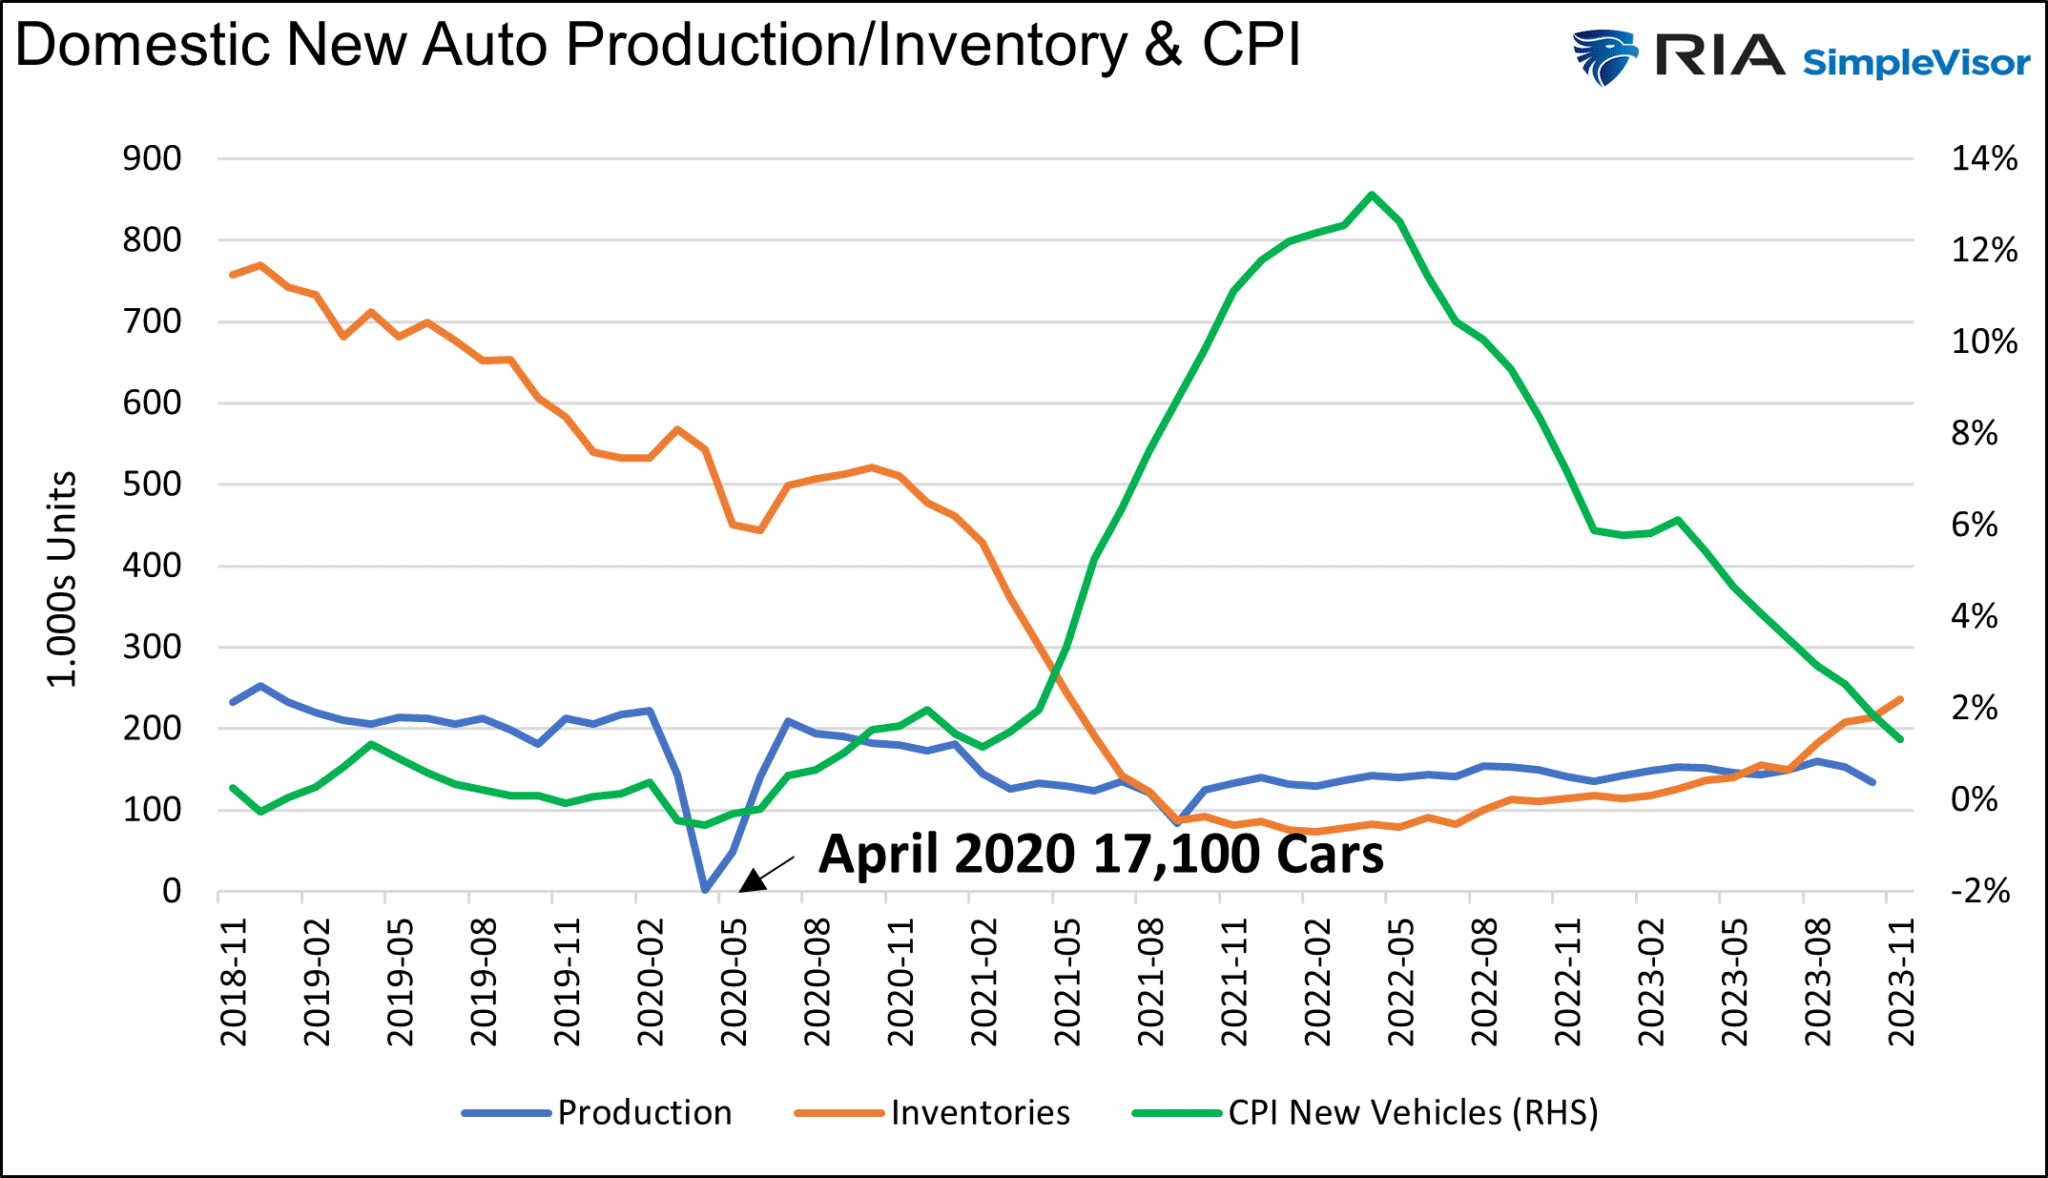 Domestic Auto Production Inventories During Pandemic